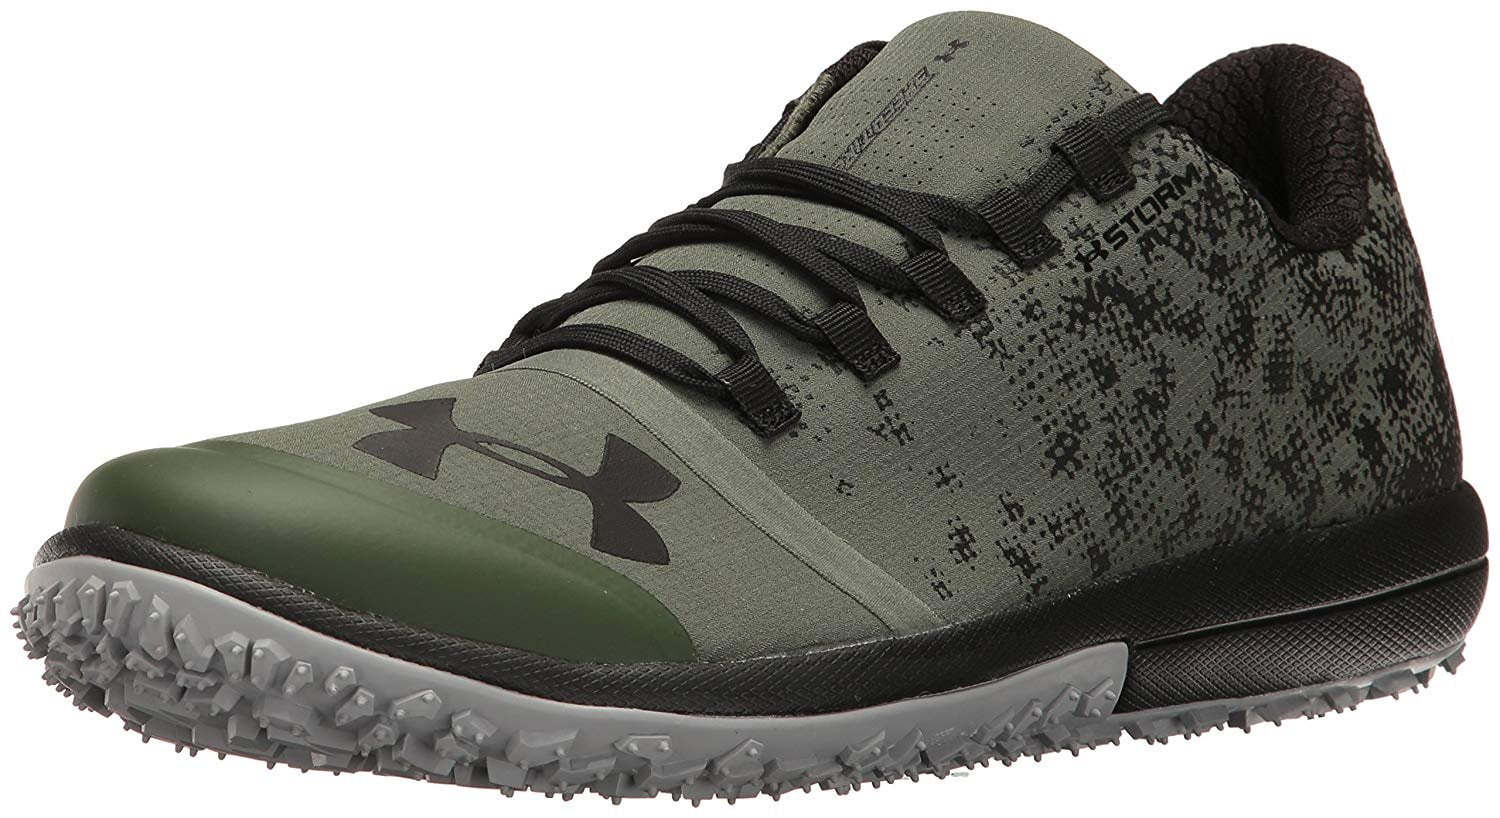 under armour men's speed tire ascent low running shoe